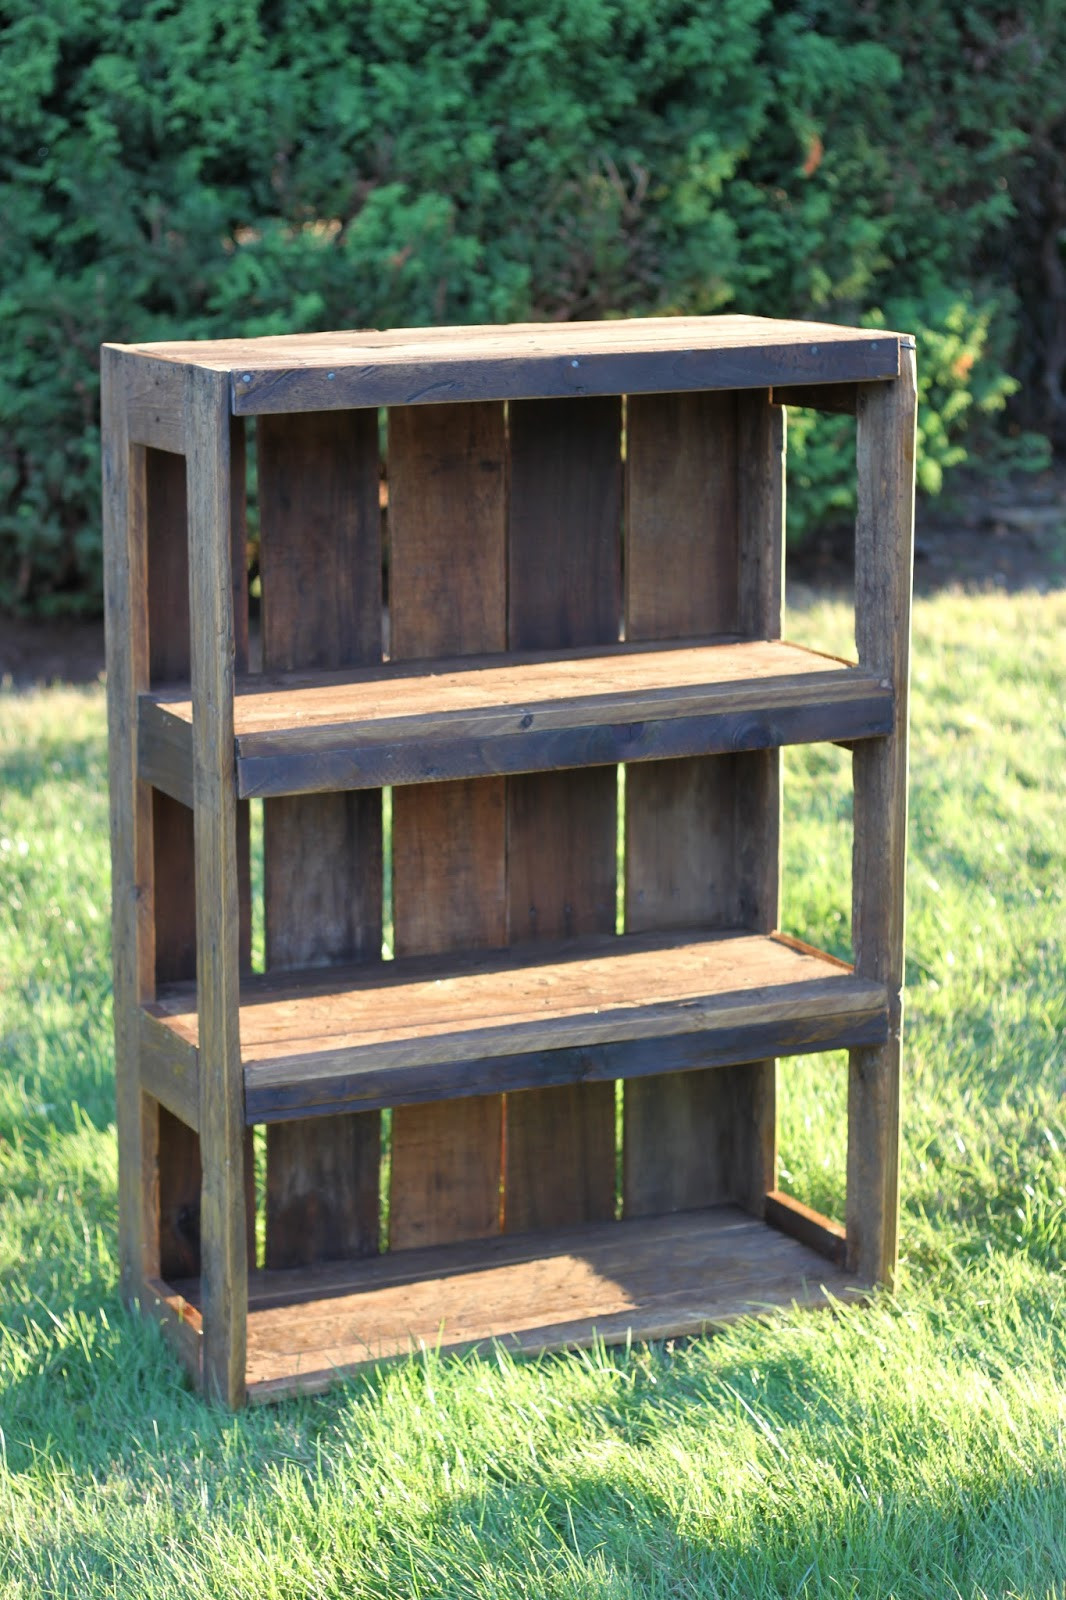 DIY With Wooden Pallets
 Made with Love that Can be Felt DIY Pallet Bookshelf 